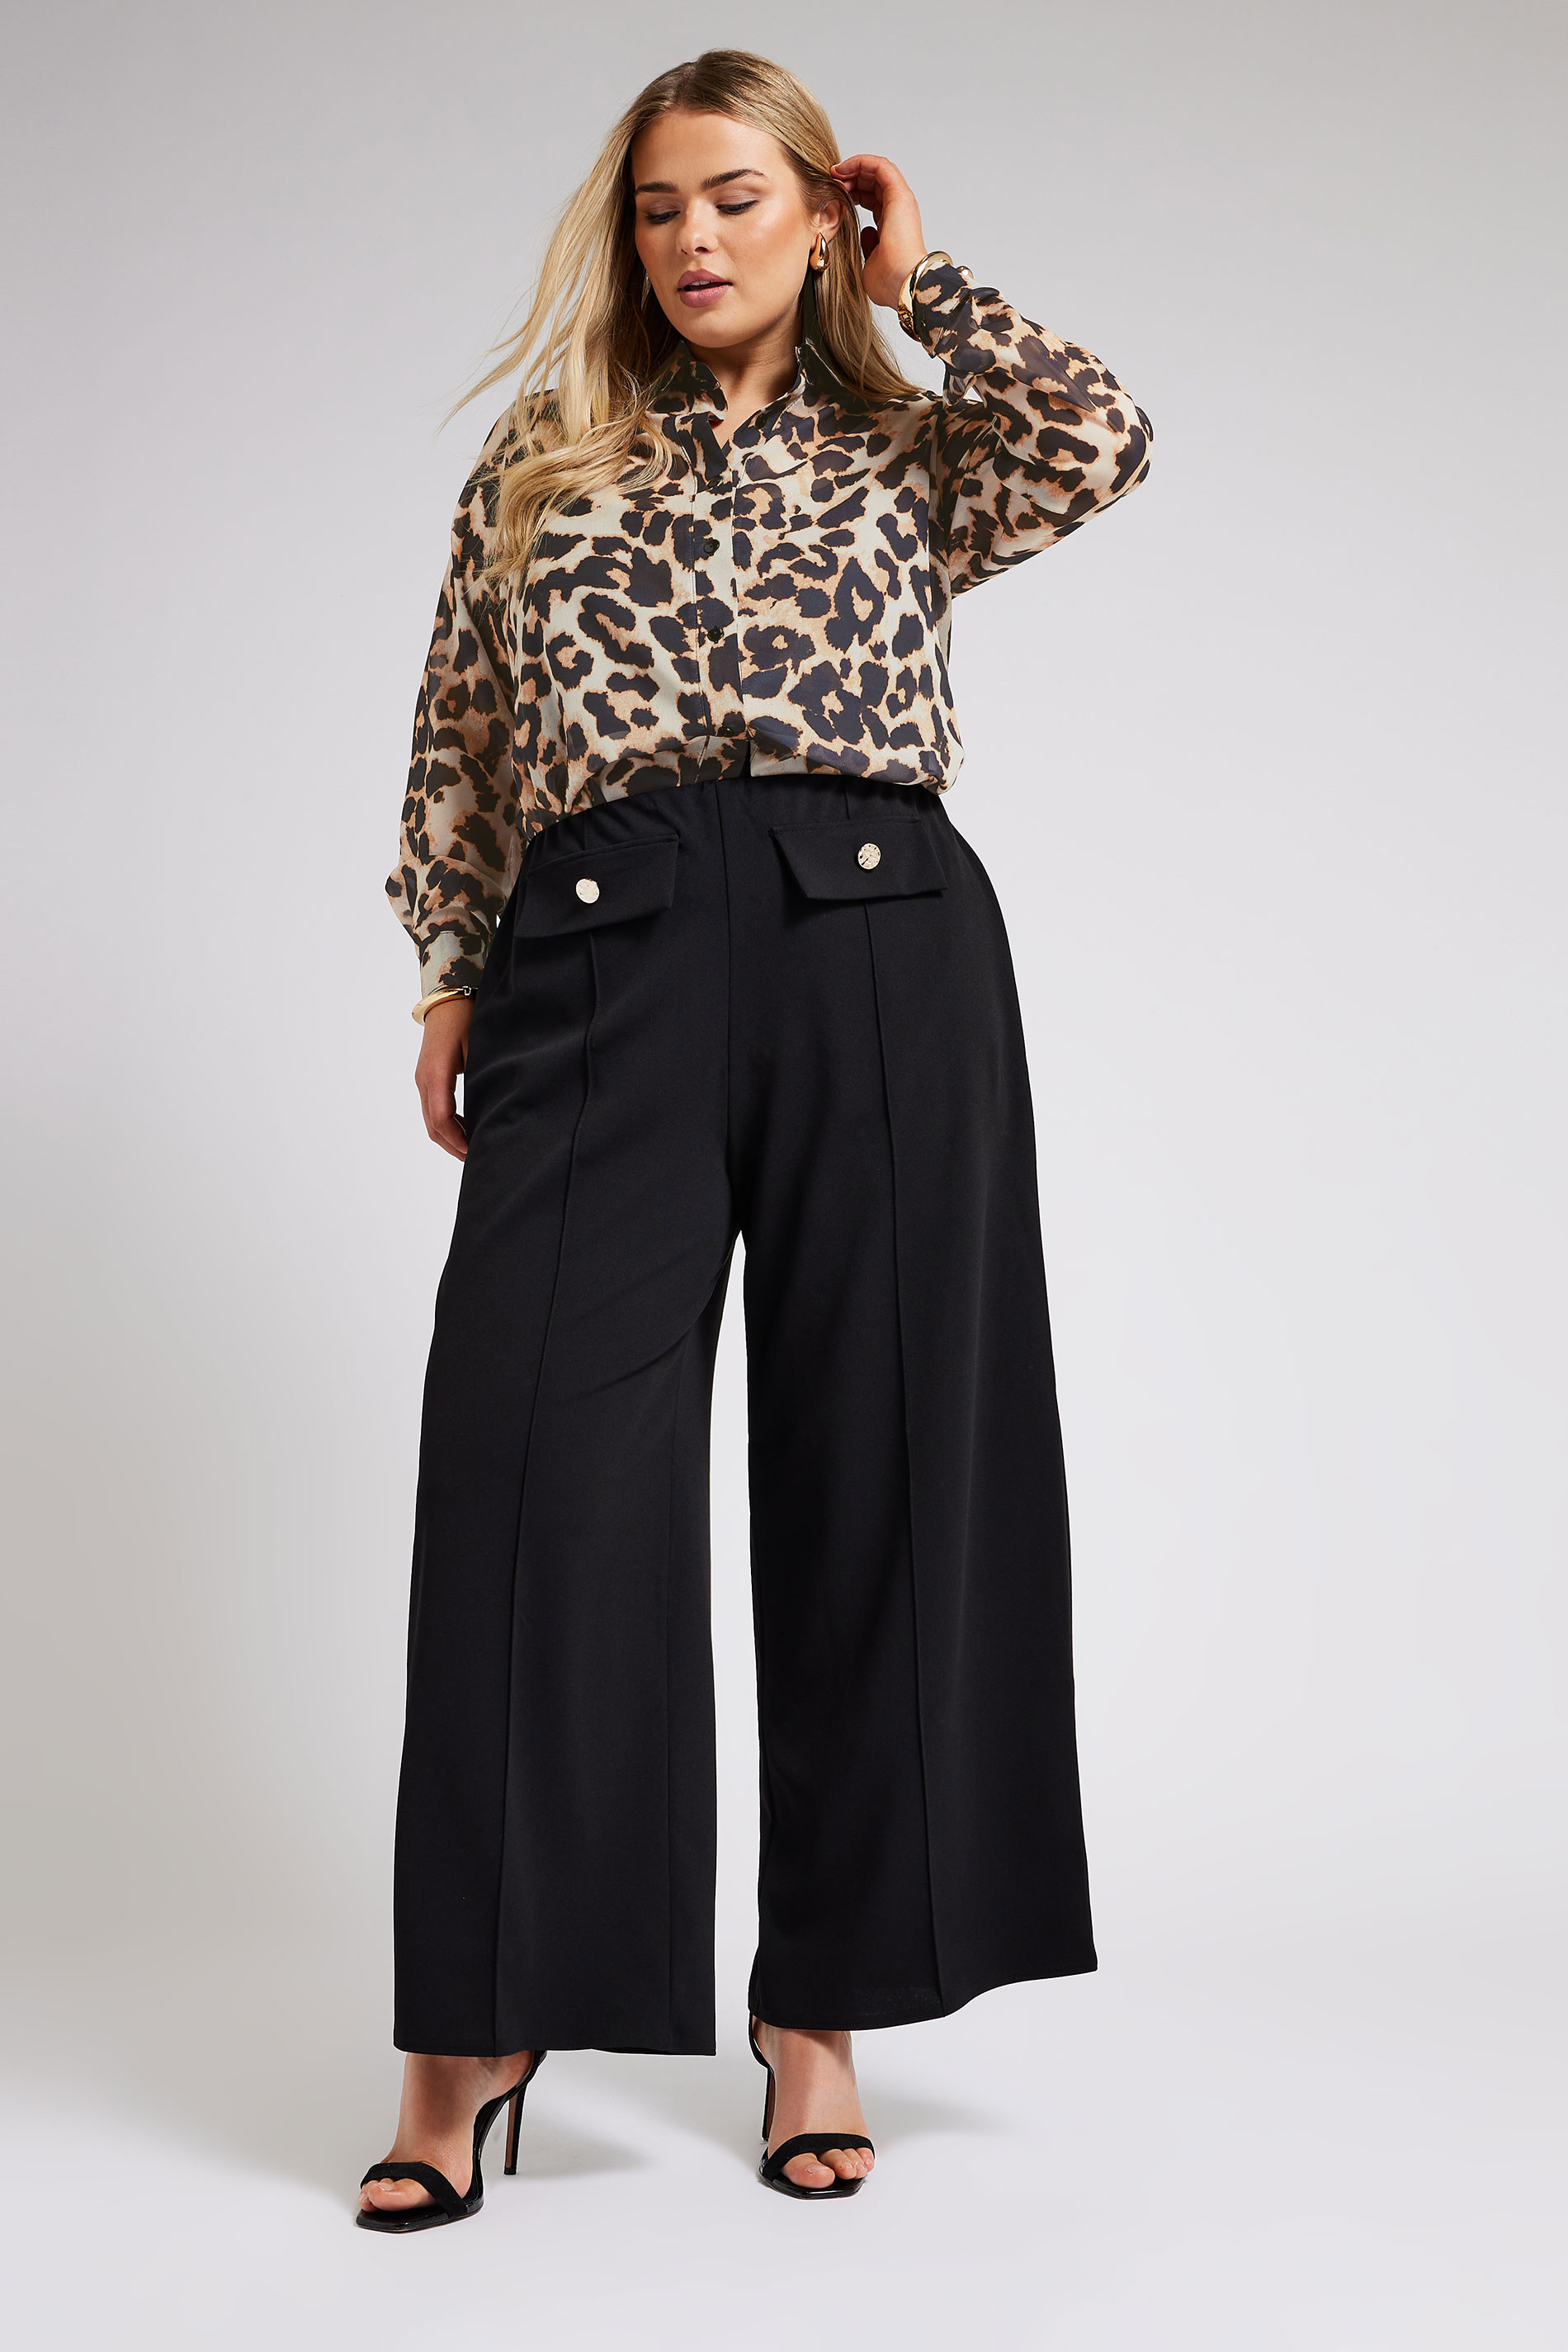 YOURS LONDON Plus Size Natural Brown Leopard Print Shirt | Yours Clothing 2